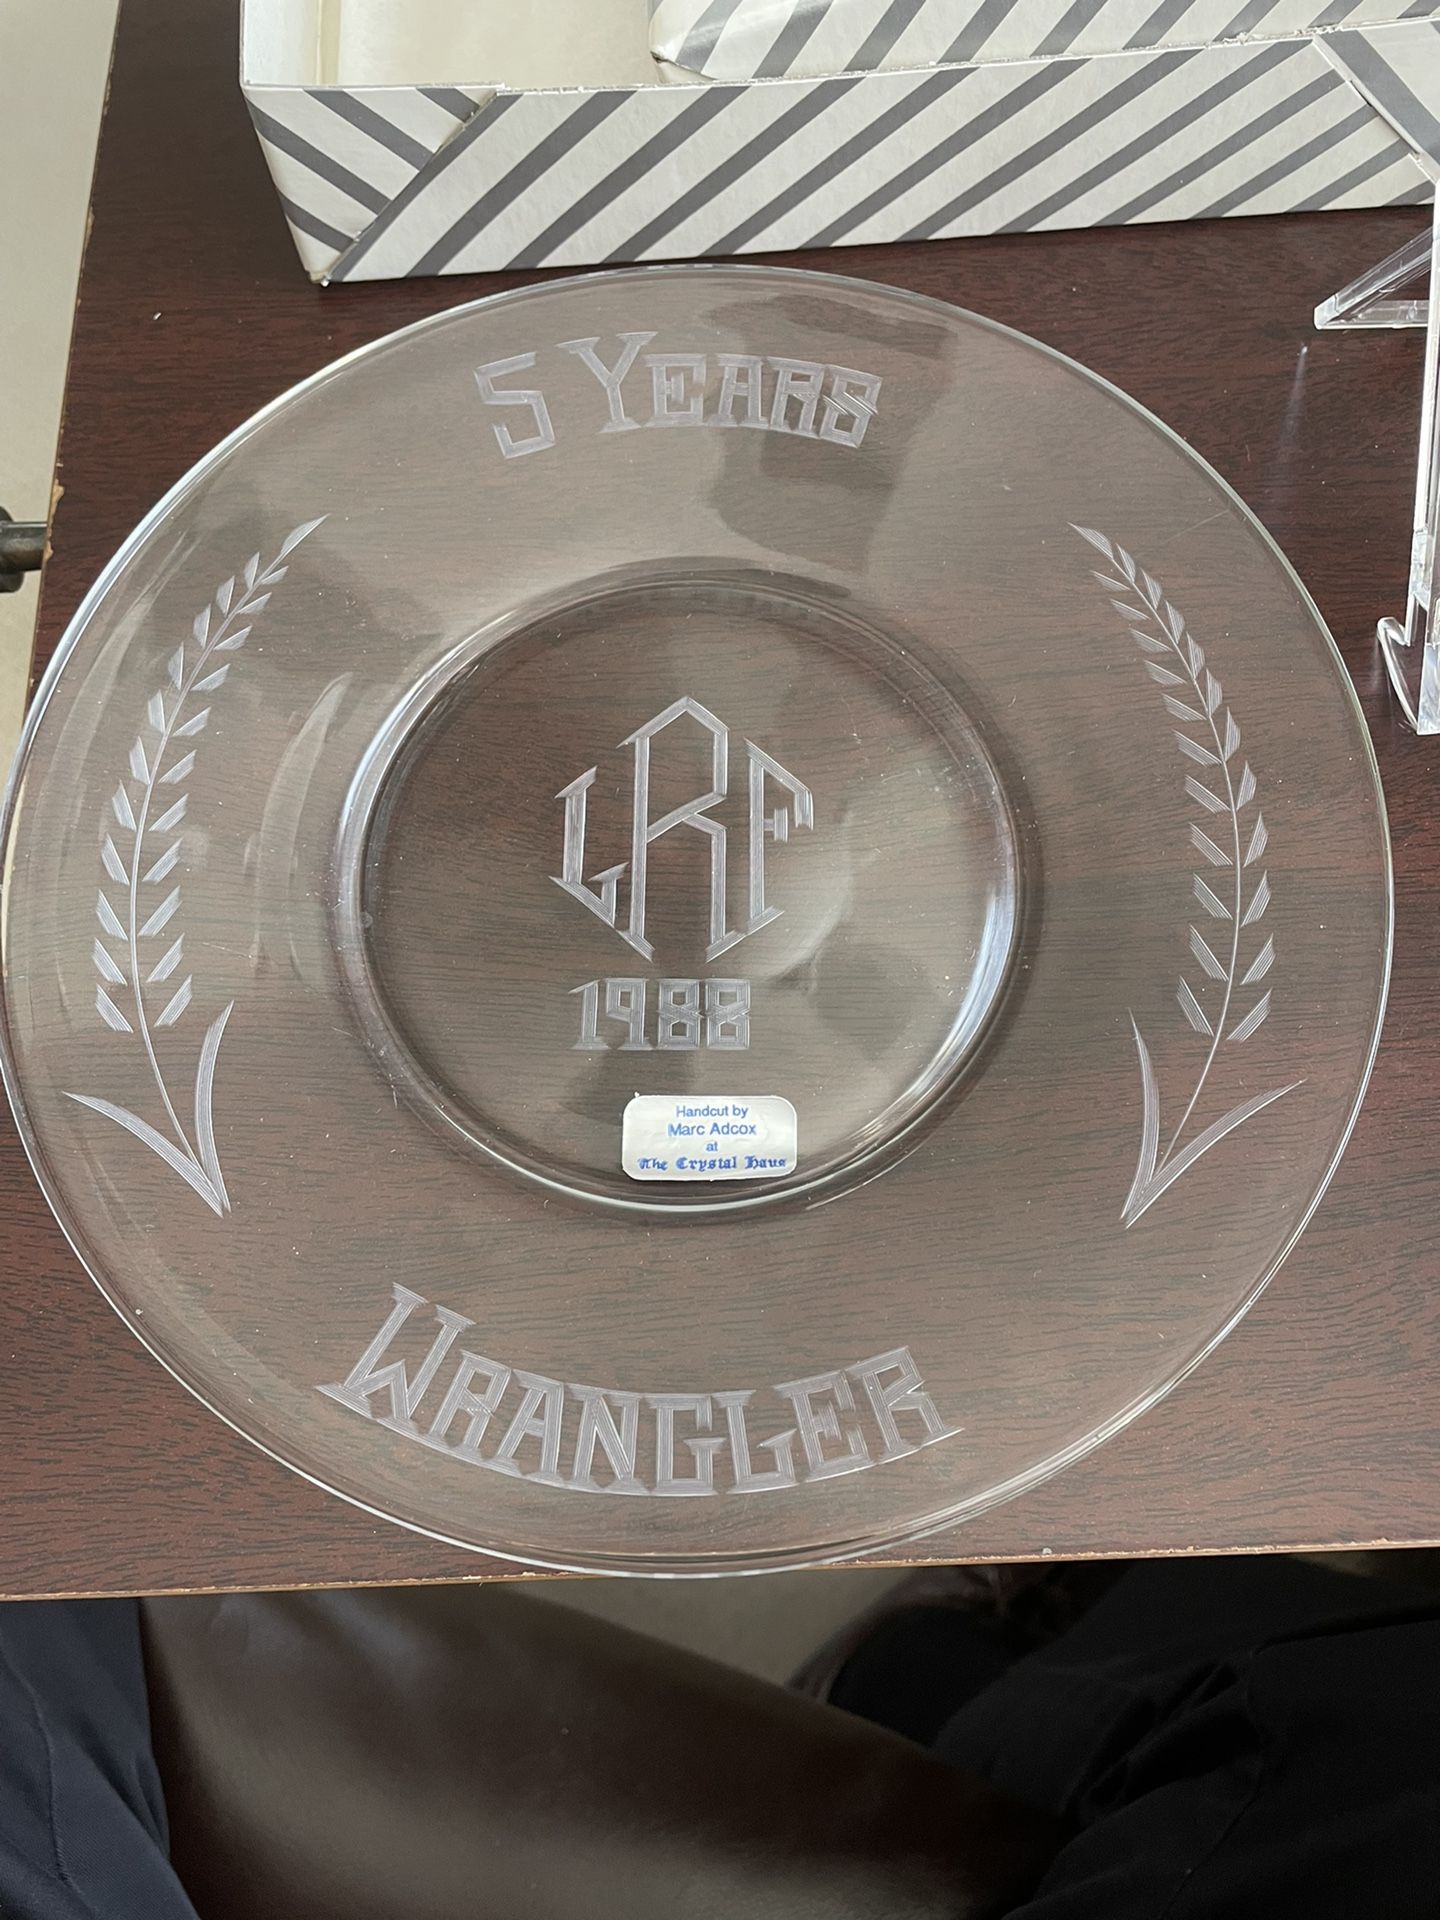 Wrangler 5 Years Service Crystal Plate-$10